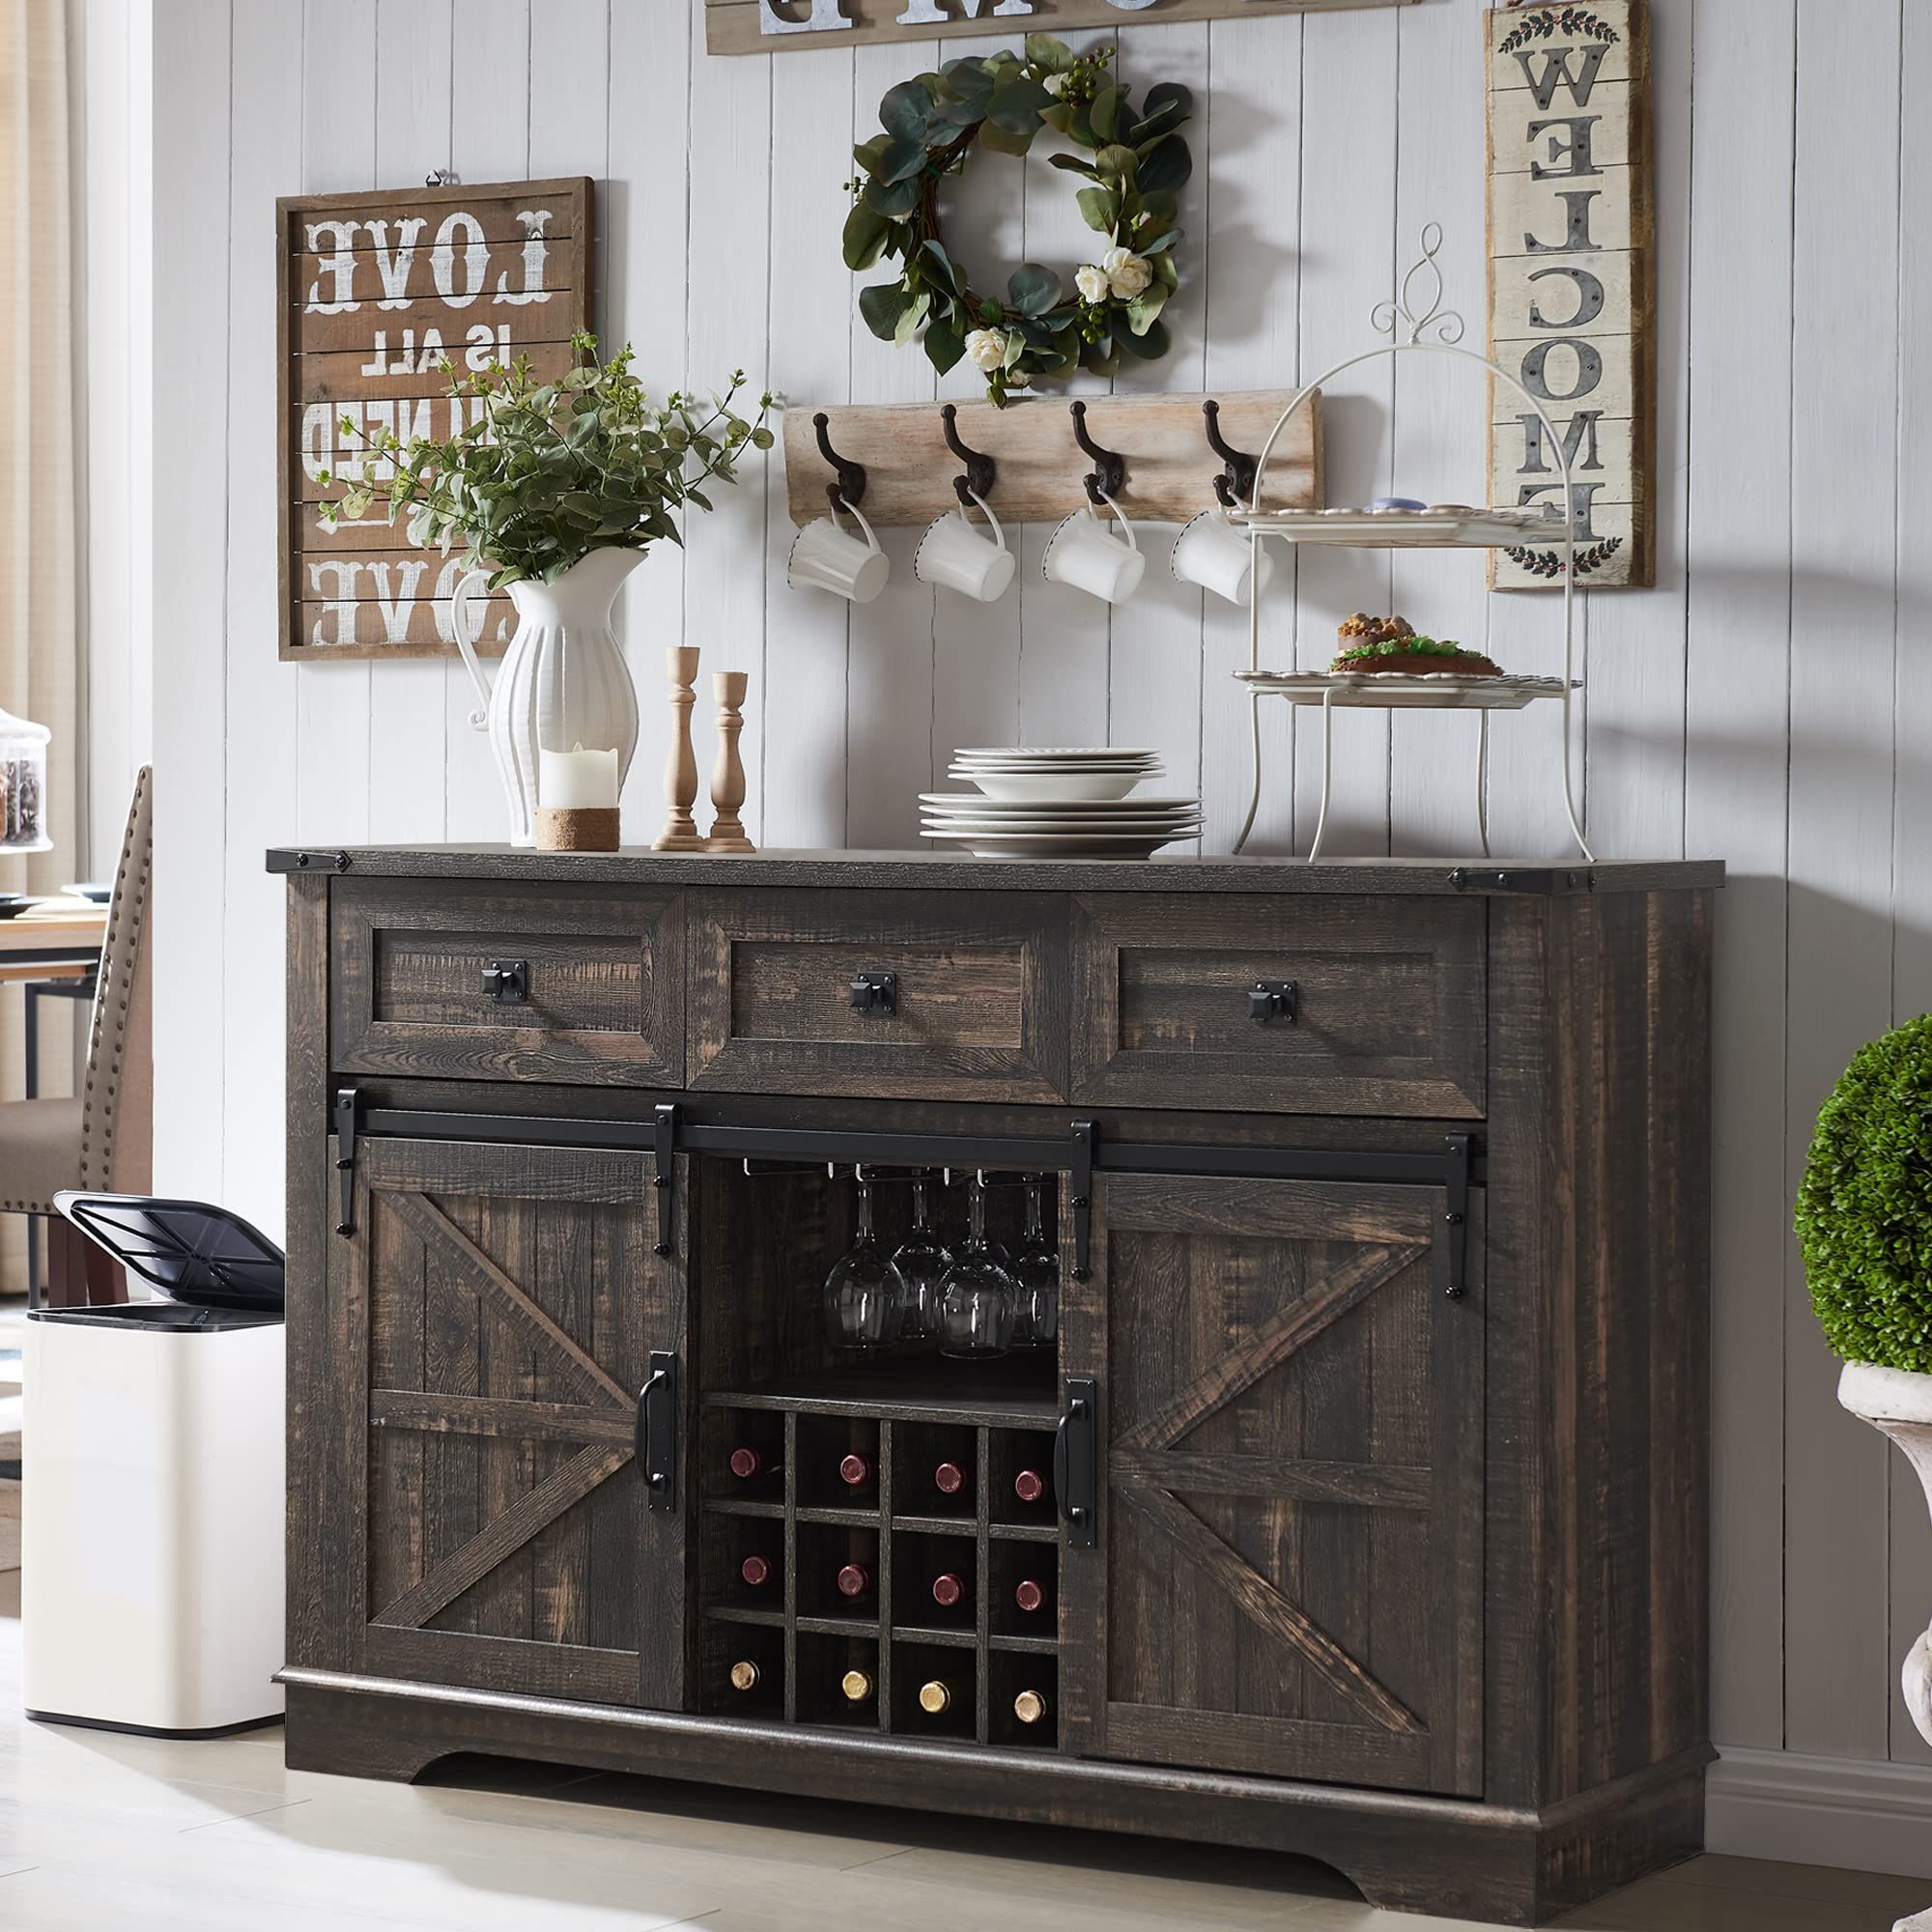 Sideboards Double Barn Door Buffet With Regard To Widely Used Amazon: Okd Farmhouse Buffet Cabinet With Storage, 54" Sideboard With 3  Drawers, Sliding Barn Door, Wine And Glass Rack, Storage Shelves, Liquor  Coffee Bar Cupboard For Kitchen, Dining Room, Dark Rustic Oak : (View 2 of 10)